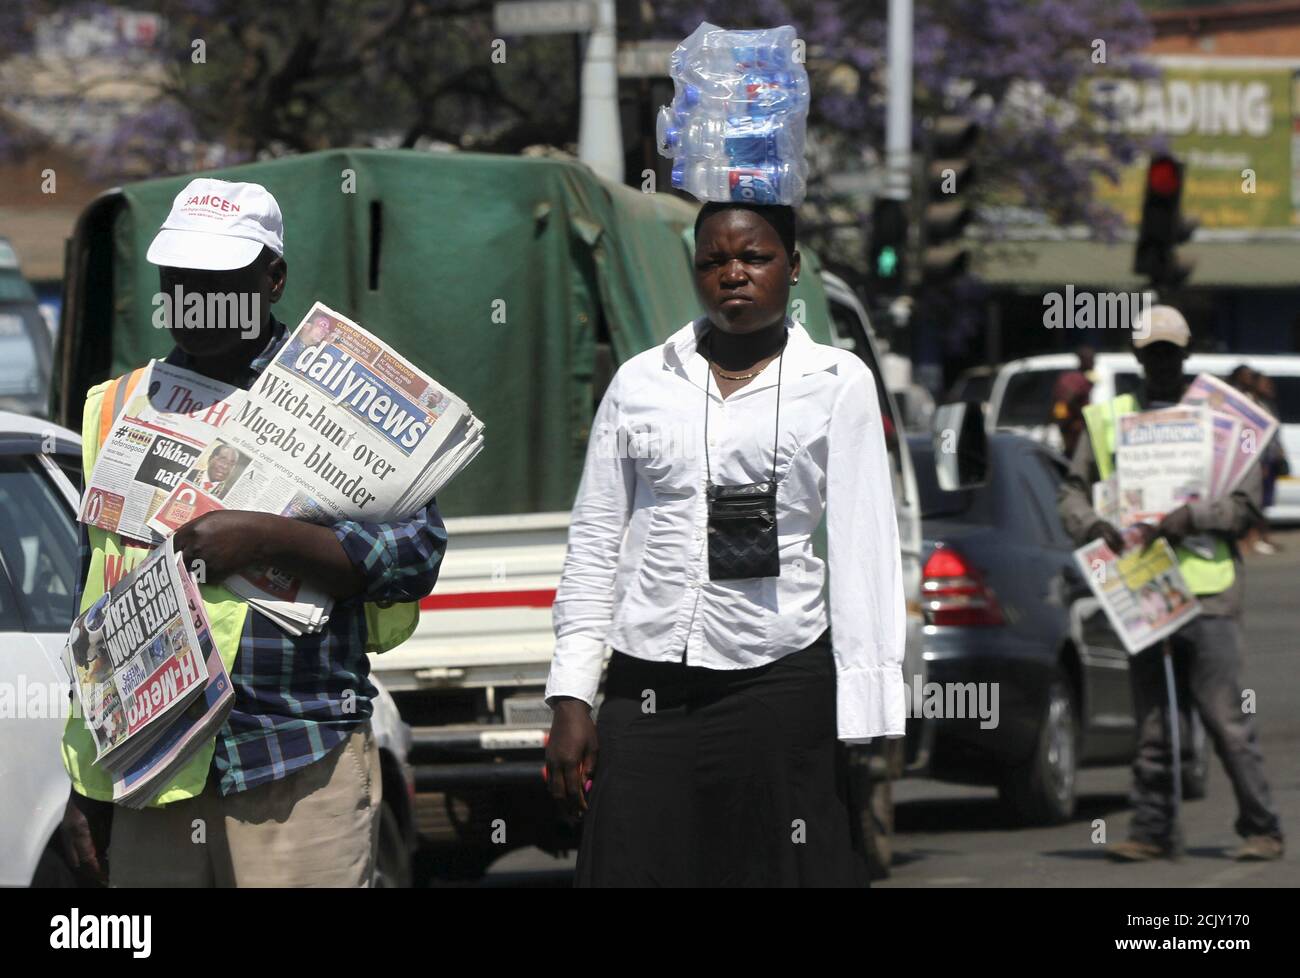 Hawkers sell goods on the streets of Zimbabwe's capital Harare, September 17, 2015. Most Zimbabweans survive through vending and hawking and even the country's police are no exception. As Zimbabwe sheds any veneer of formally regulated commerce, a host of vendor unions claim to represent between 100,000 and 6 million traders, nearly half the nation's 13 million people. Picture taken September 17, 2015 REUTERS/Philimon Bulawayo Stock Photo